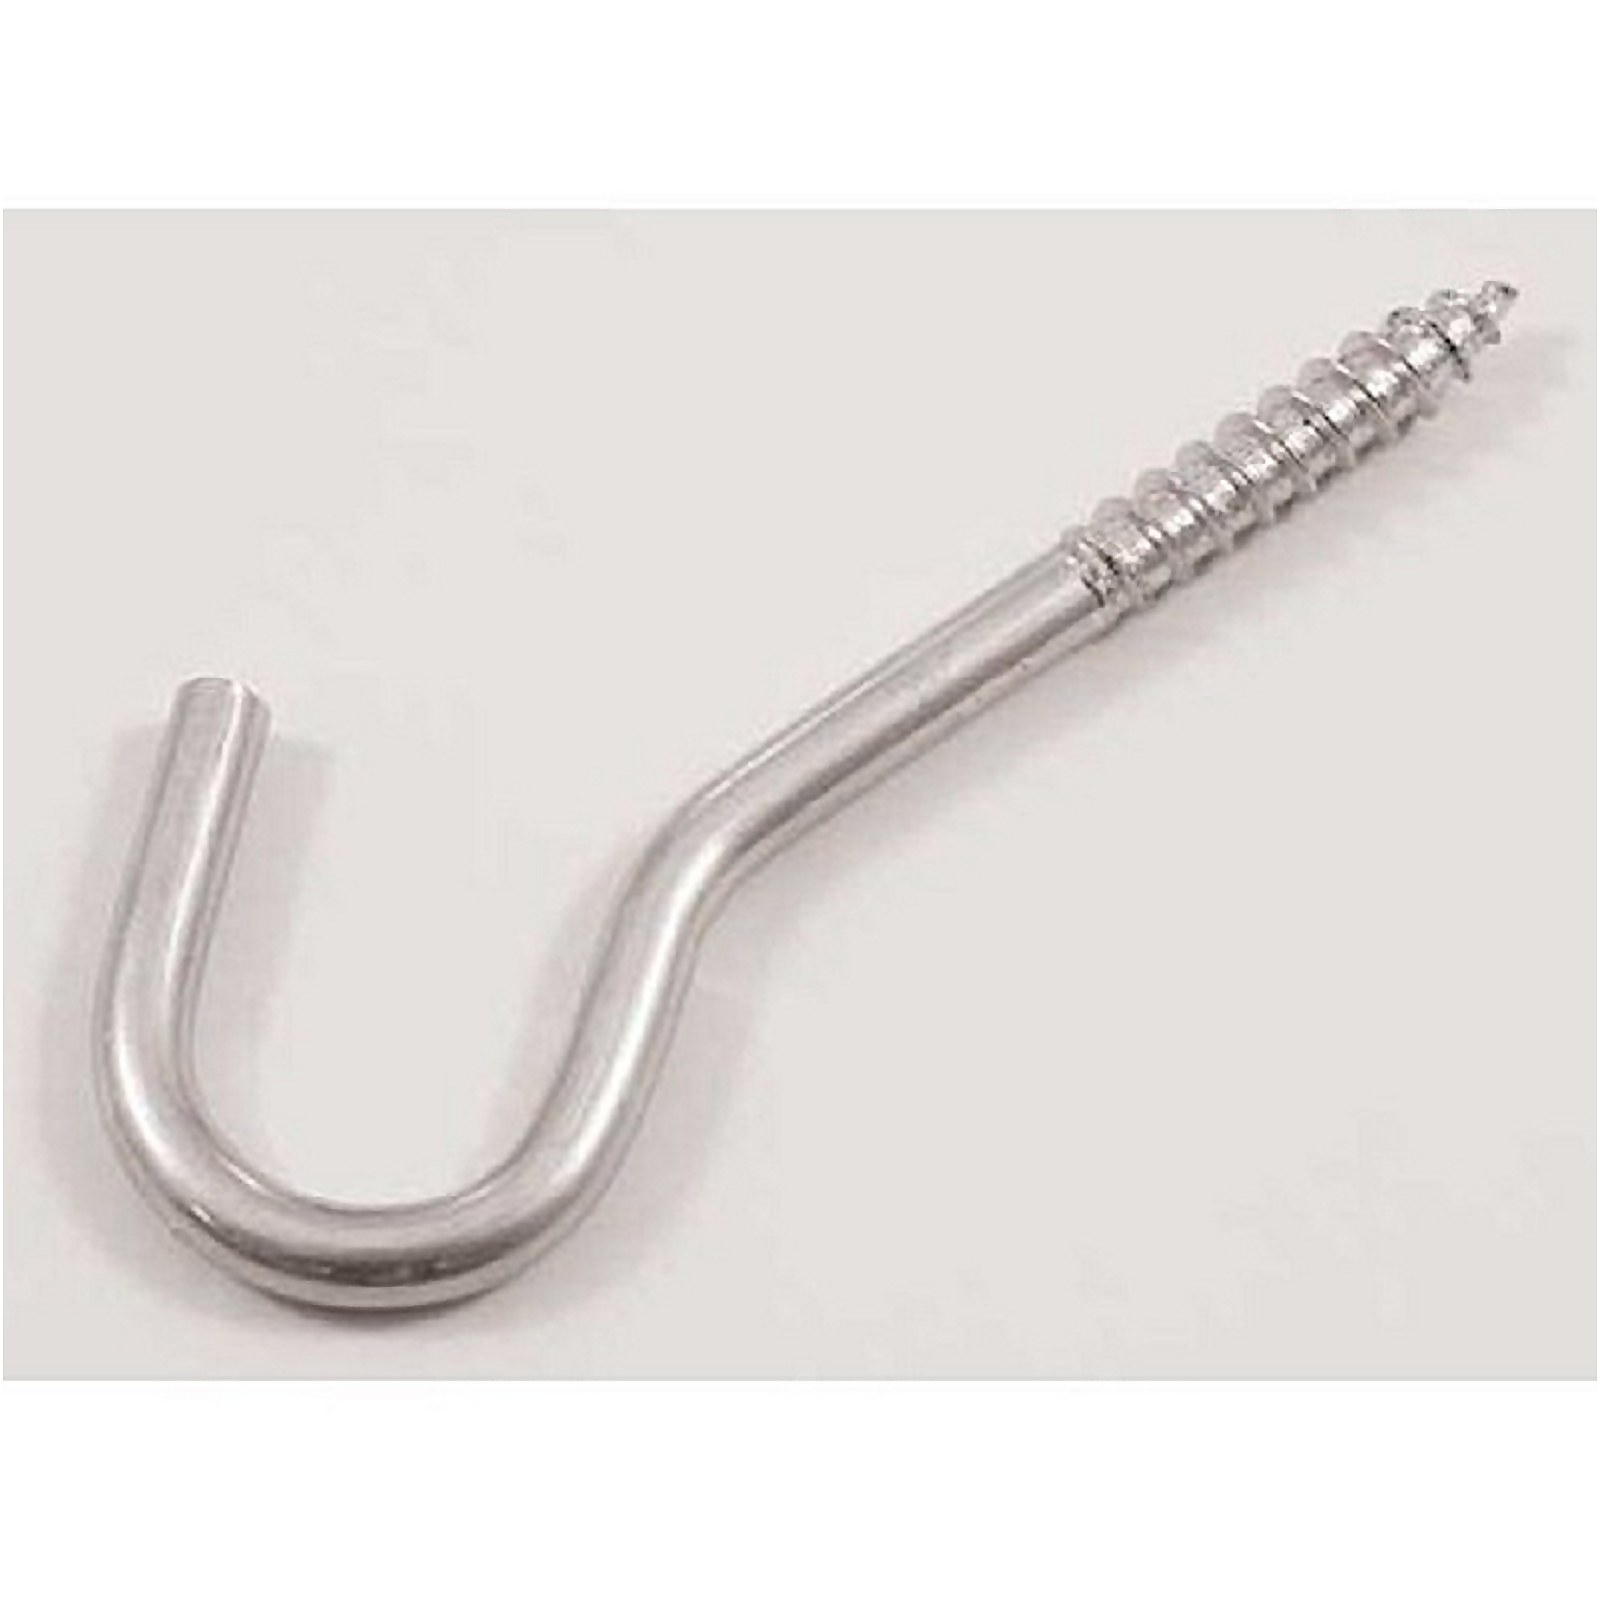 Photo of Large Screw Hook - Zinc Plated - 80mm